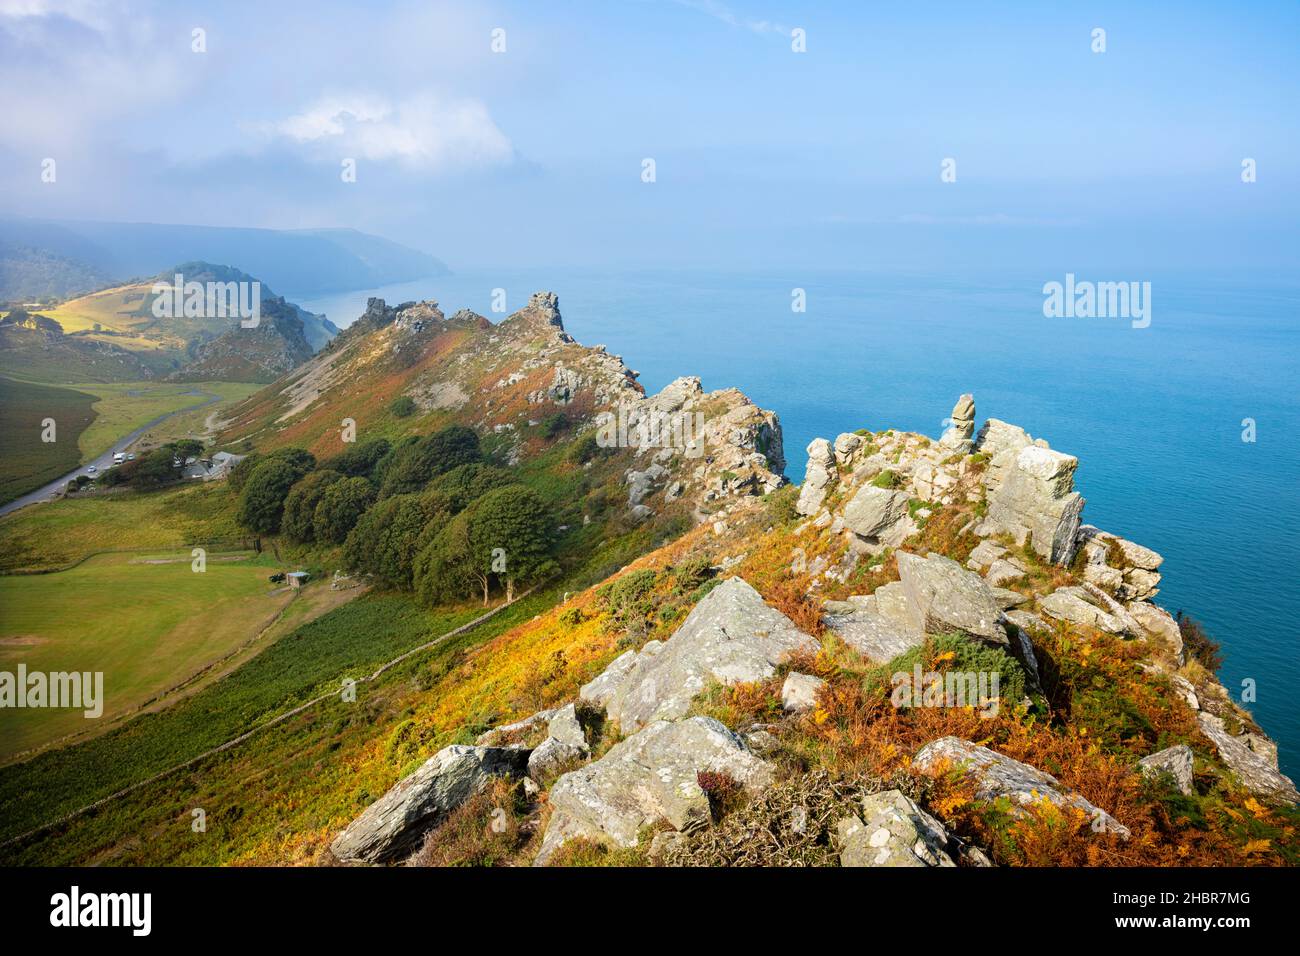 Valley of the Rocks Exmoor National park near Lynton and Lynmouth Devon England UK GB Europe Stock Photo